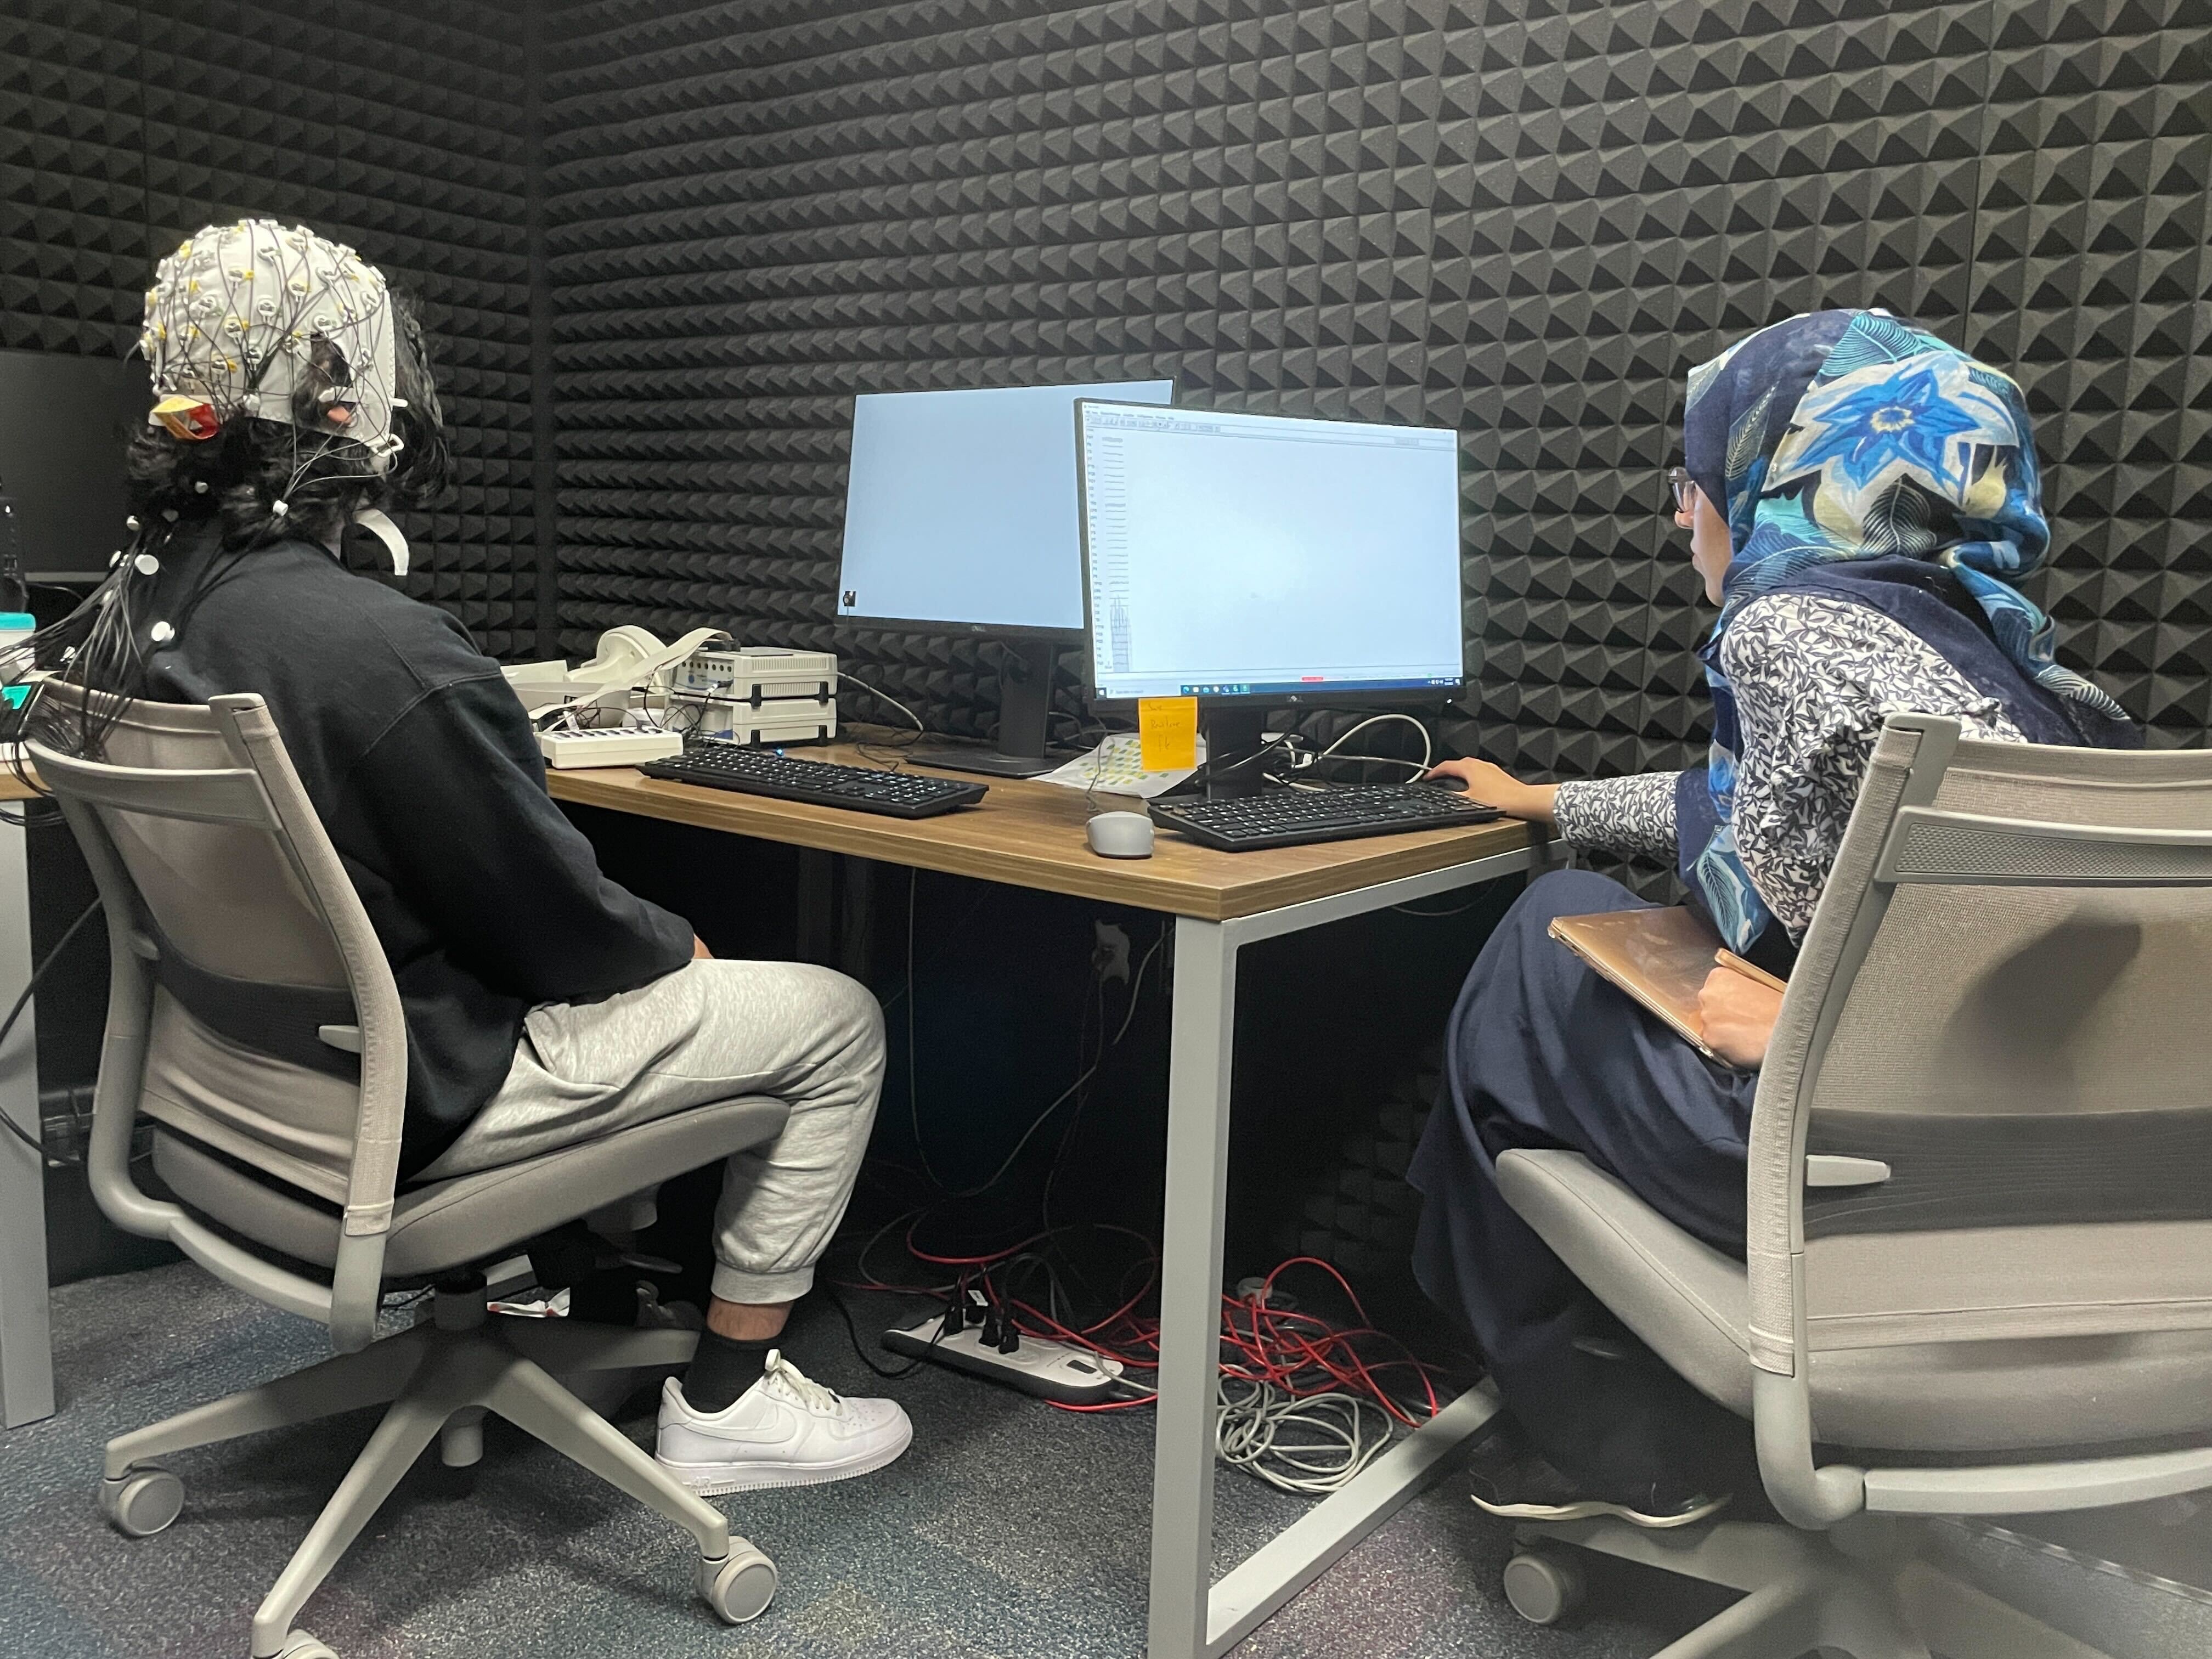 Ph.D. student Hareem Khokhar monitors a computer screen while Zahin's brain activity is captured by the EEG cap.